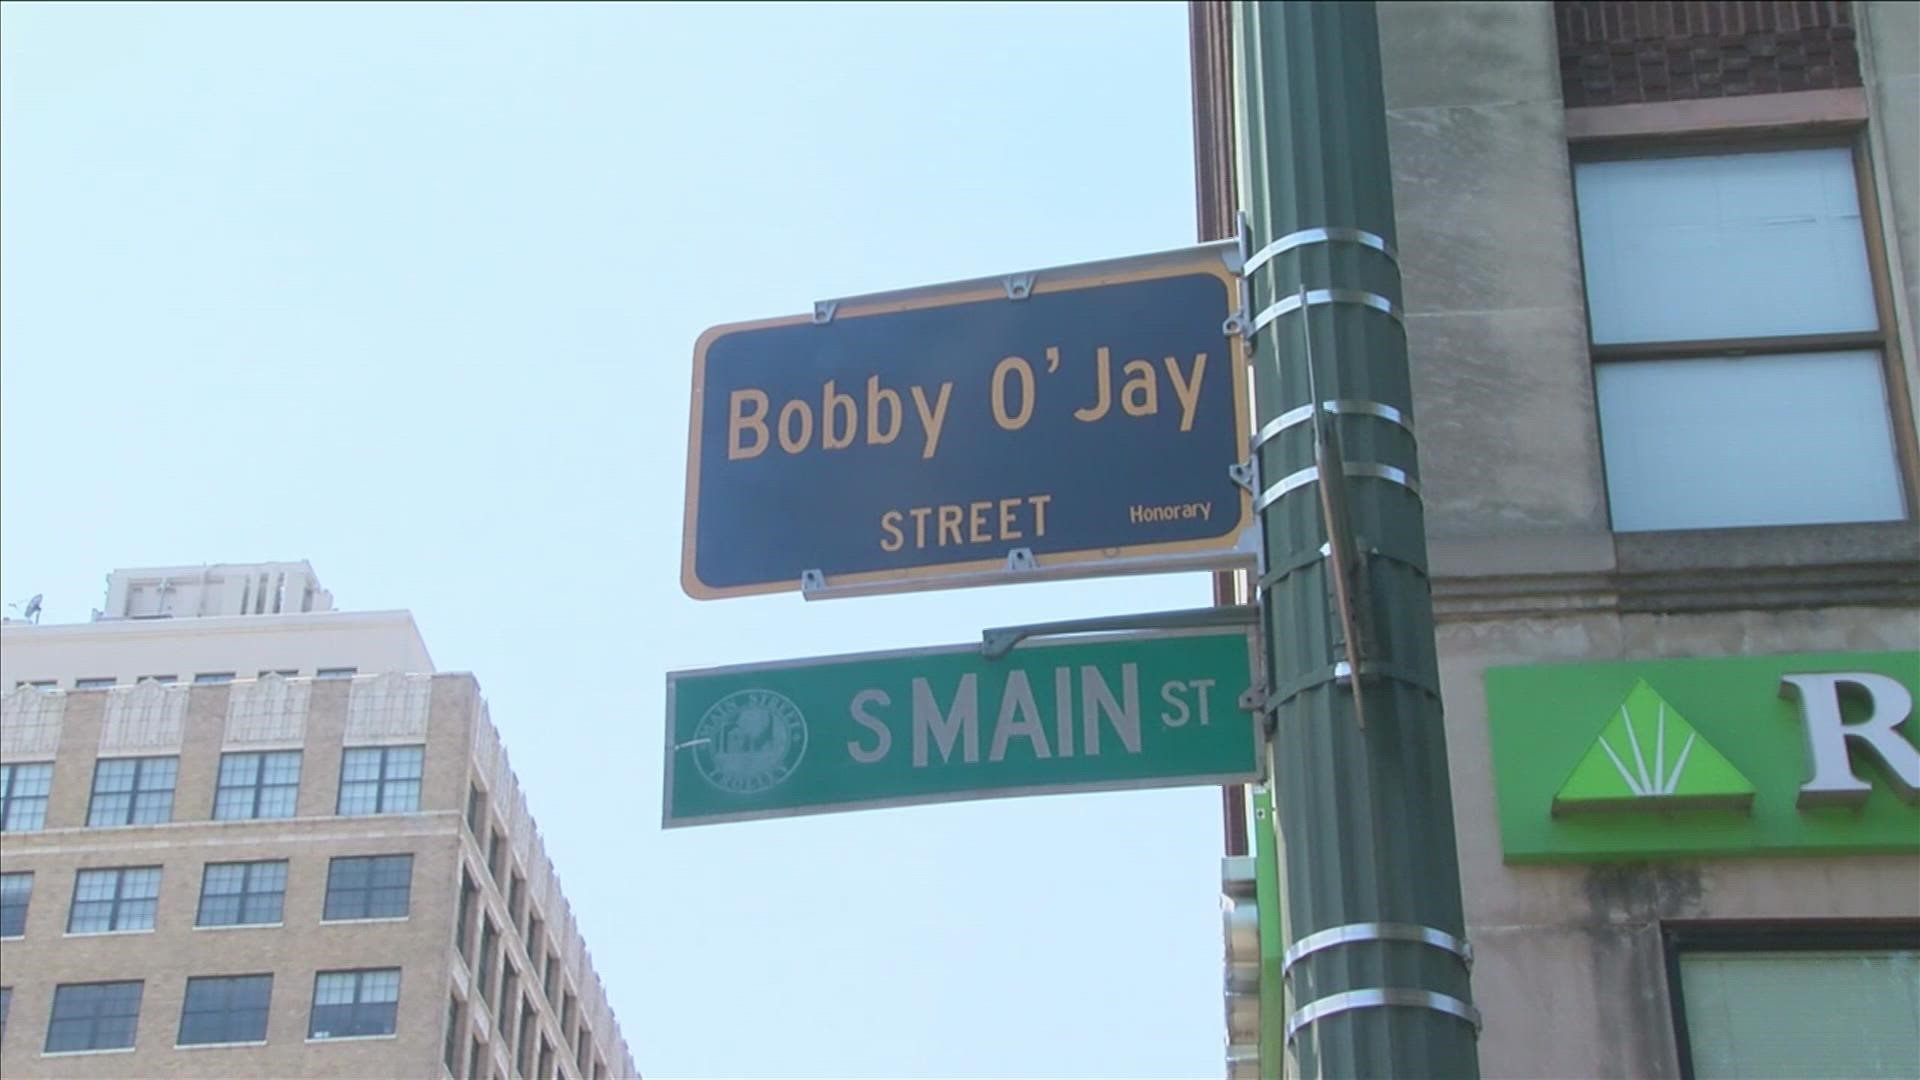 On Saturday, Former host of WDIA Bobby O'Jay was officially honored on Union Avenue and November 6th Street. Chairwoman Jamita Swearengen spoke at the unveiling.